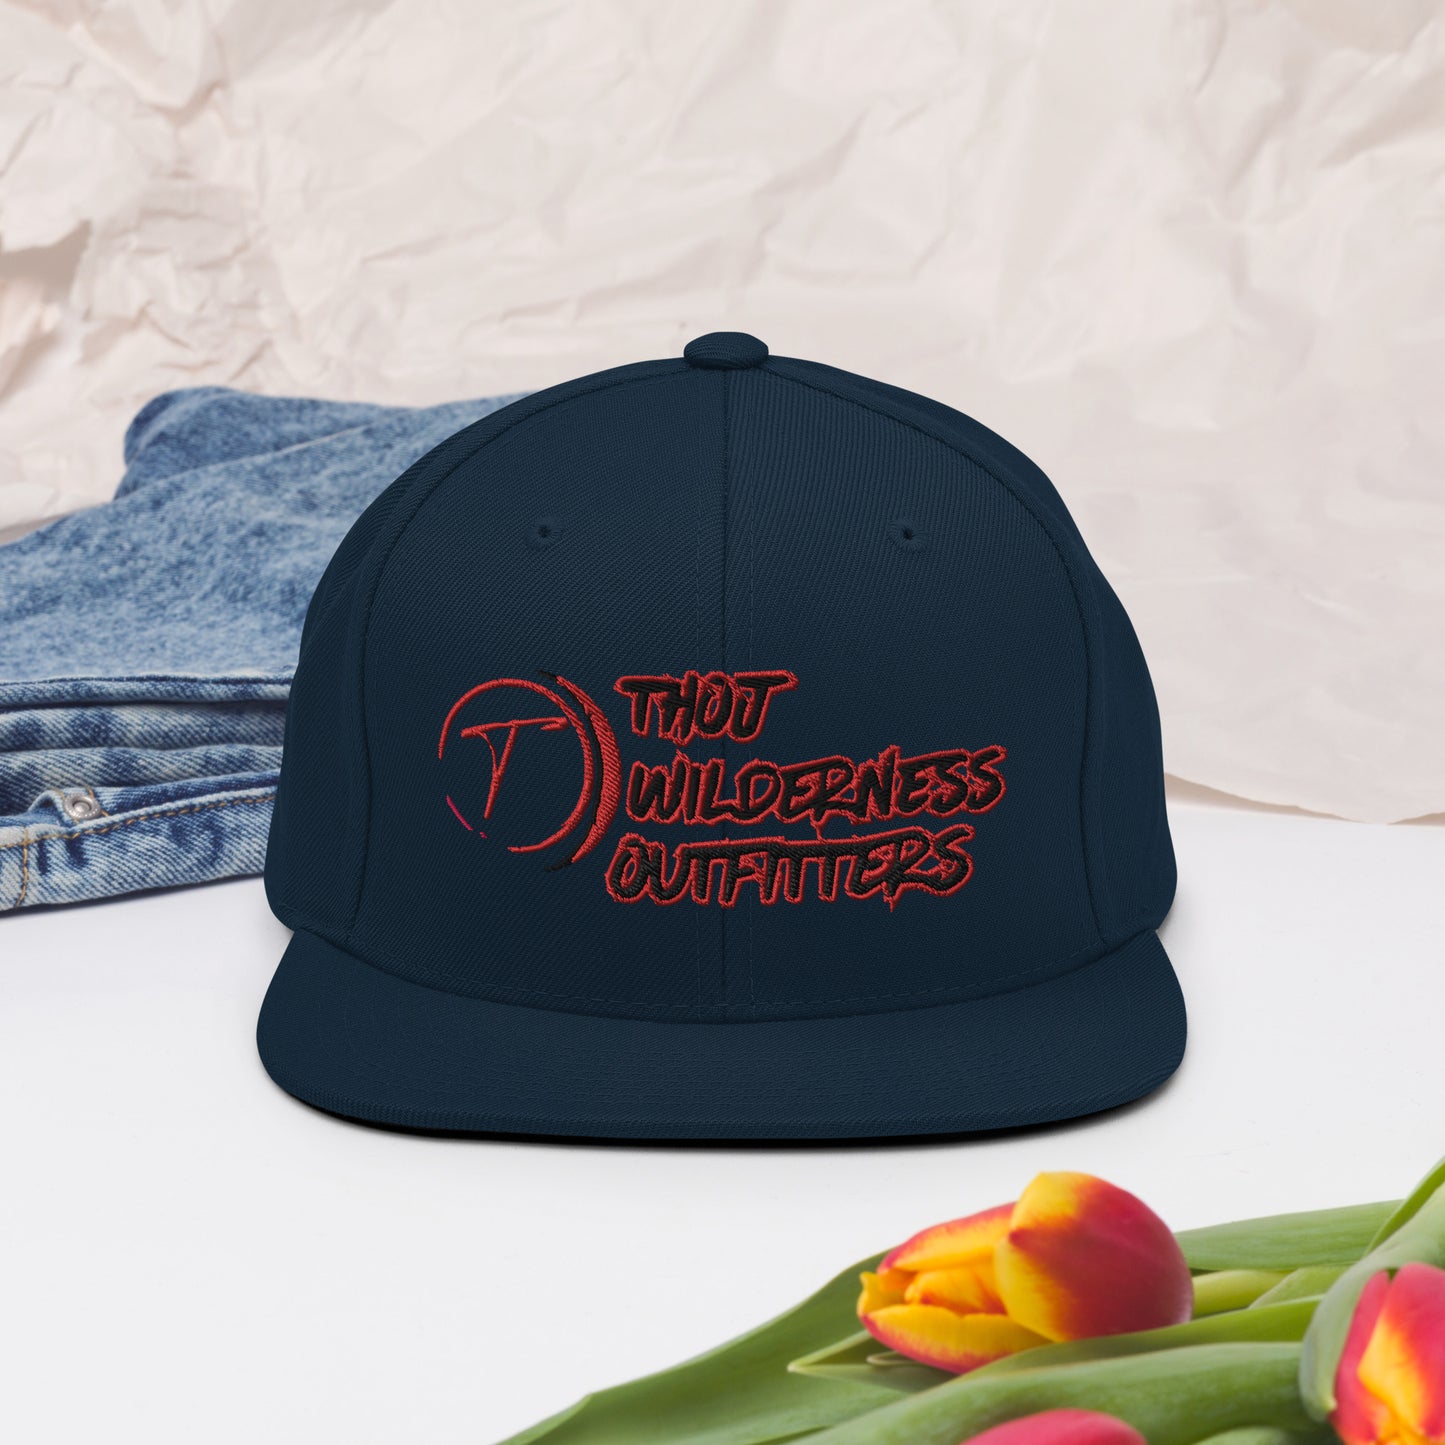 Thoj Wilderness Outfitters-Snapback Hat